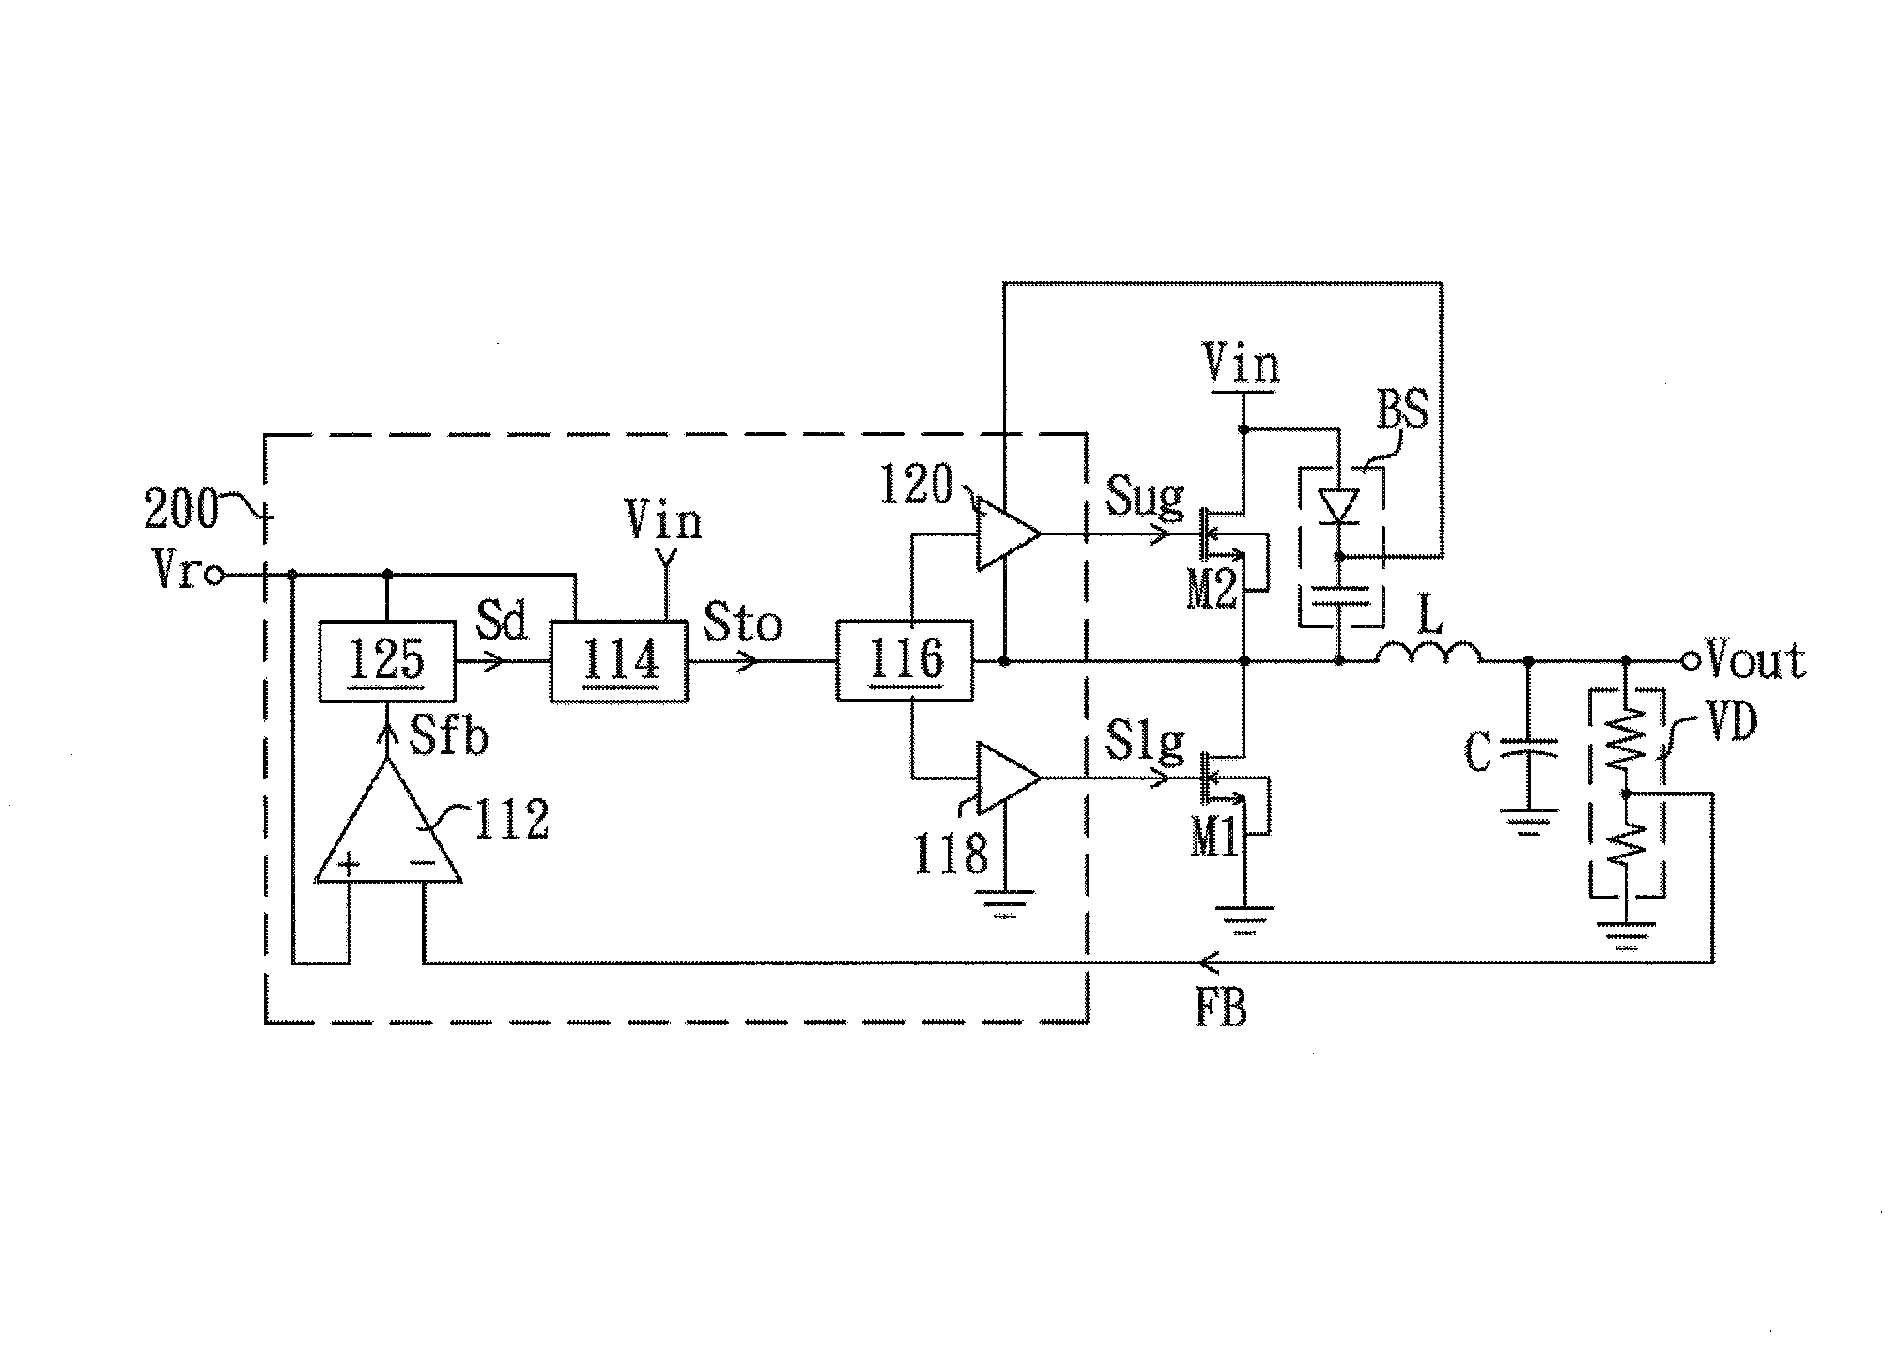 DC to DC buck converting controller with programmable on-time period unit